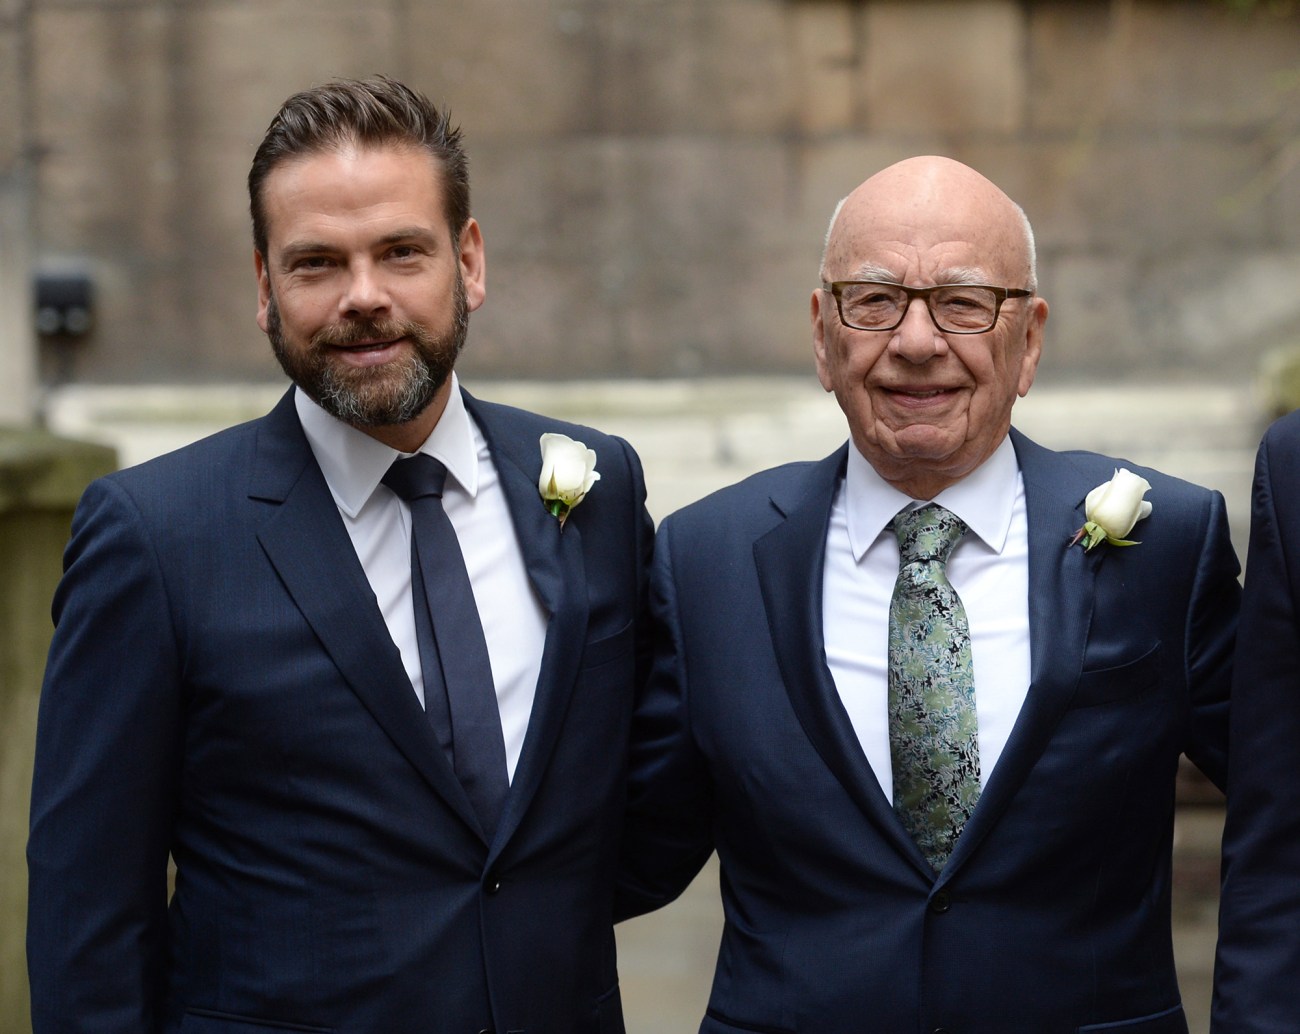 Lachlan and Rupert Murdoch, smiling, wearing suits.